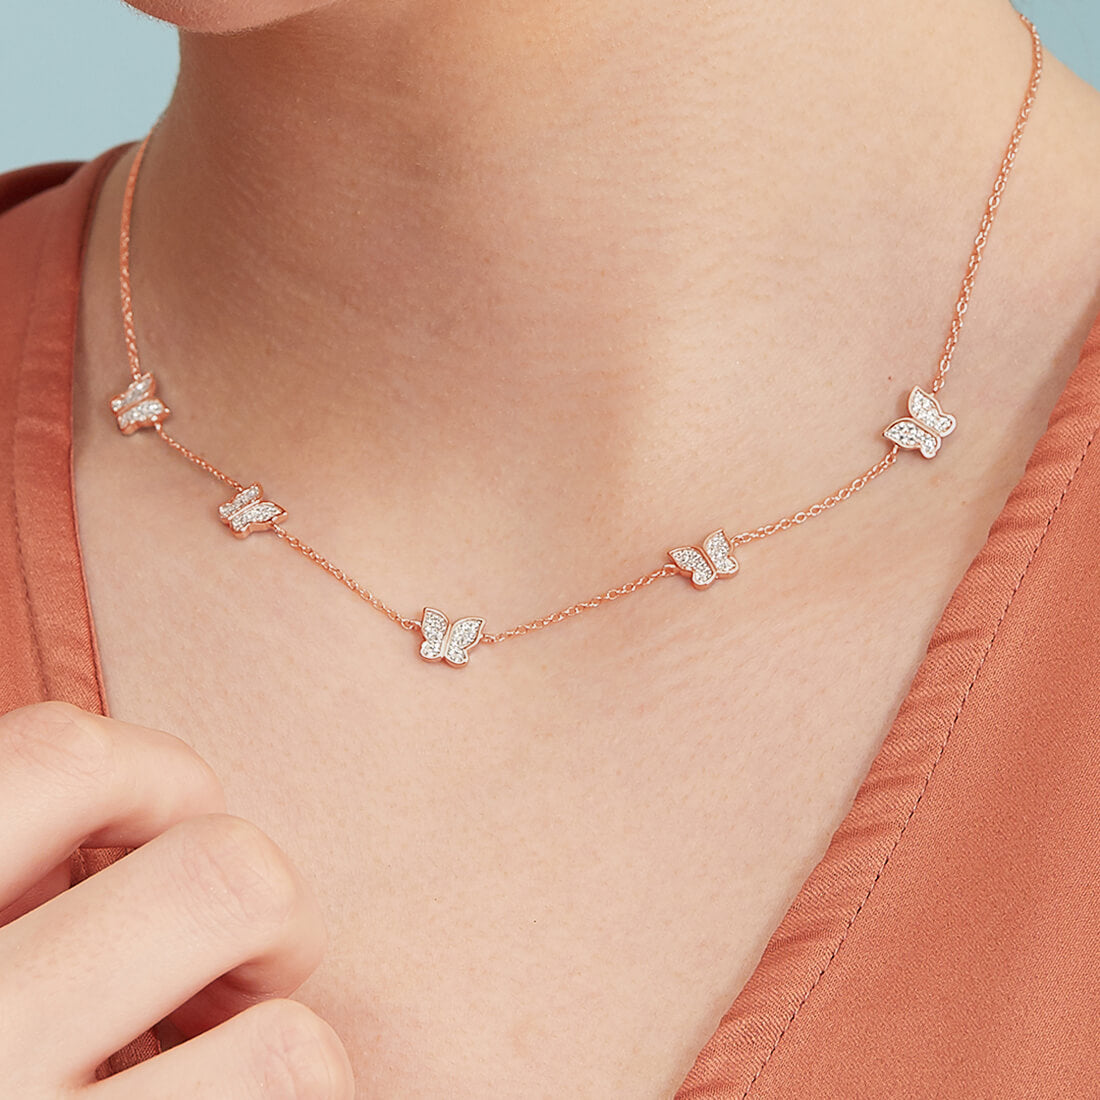 Free like a Butterfly 925 Silver Necklace in Rose Gold